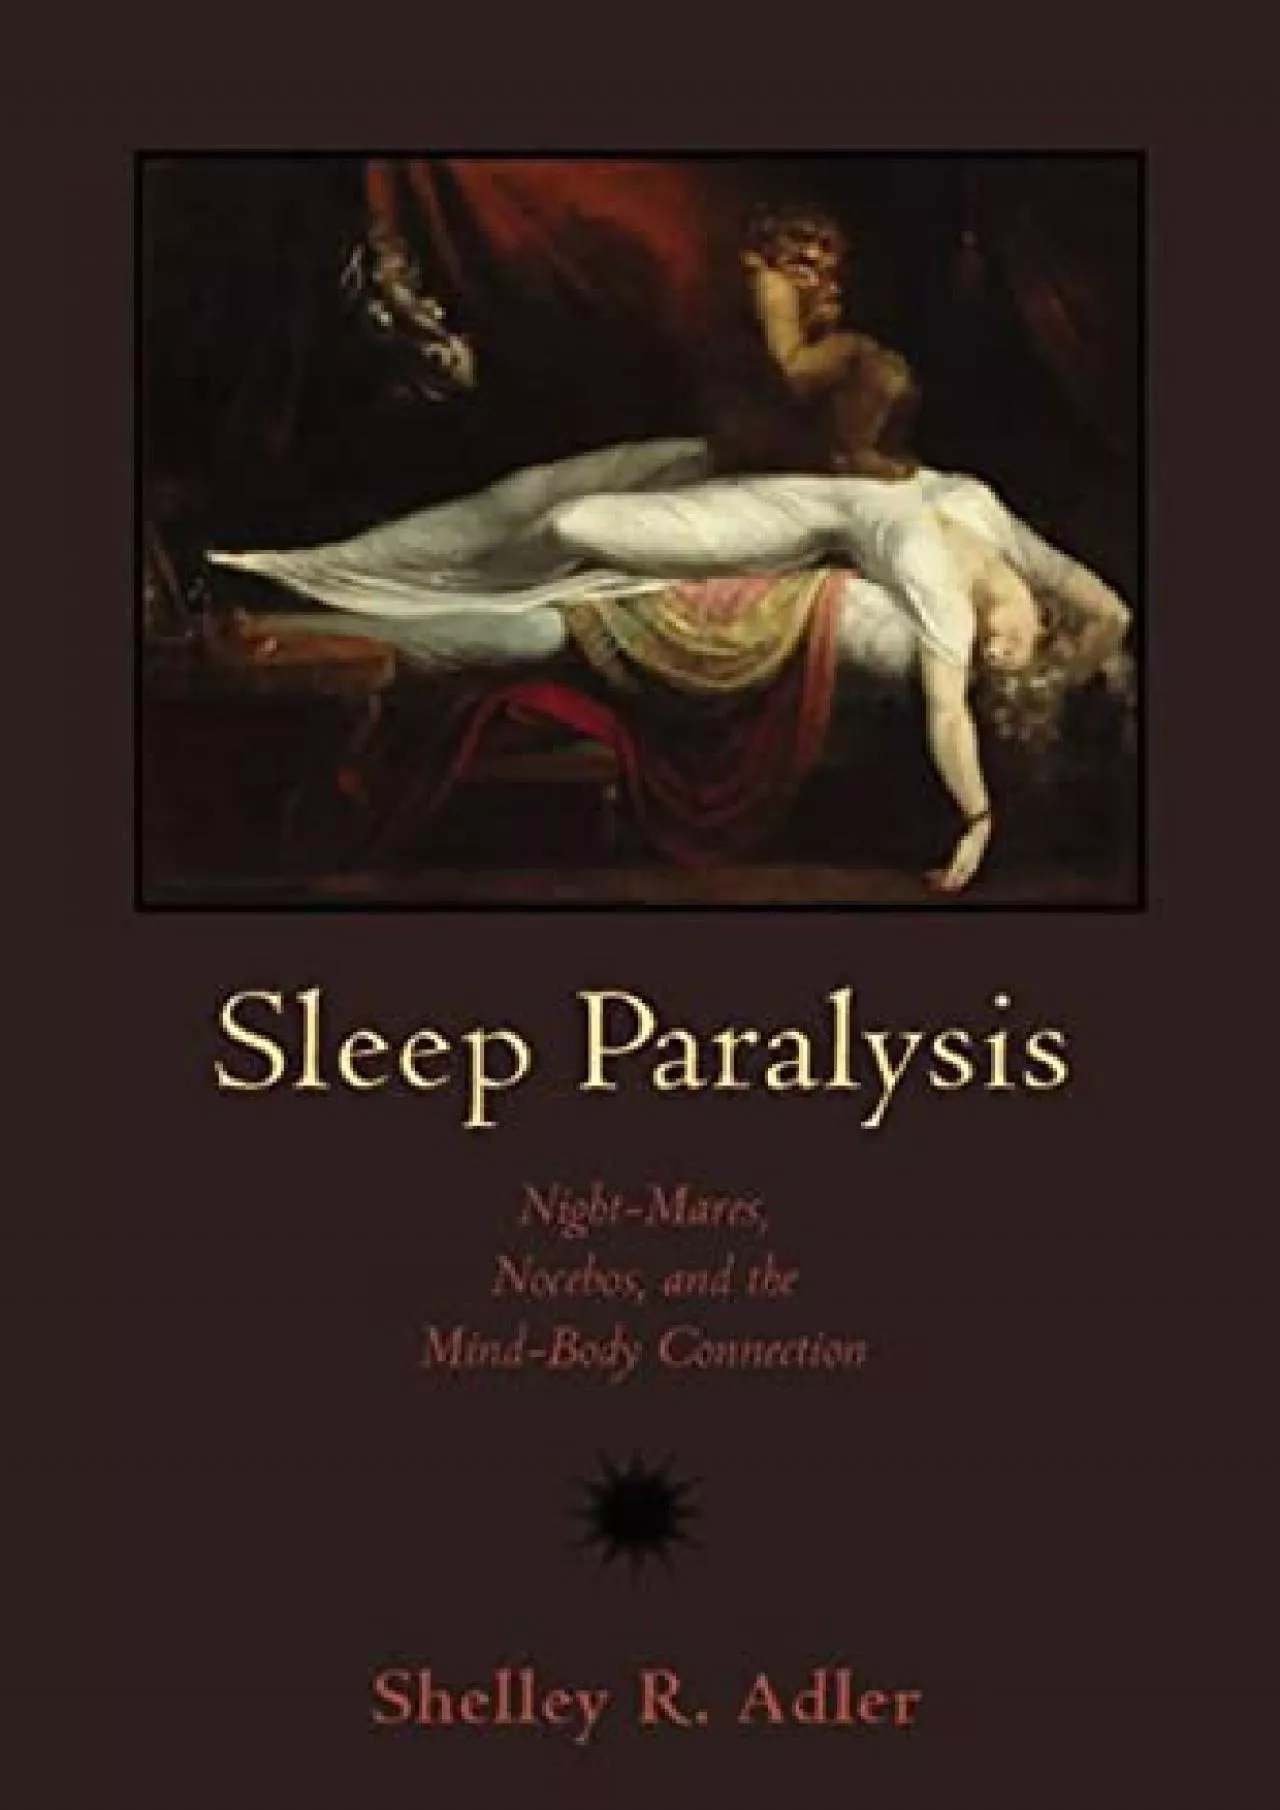 (BOOS)-Sleep Paralysis: Night-mares, Nocebos, and the Mind-Body Connection (Studies in